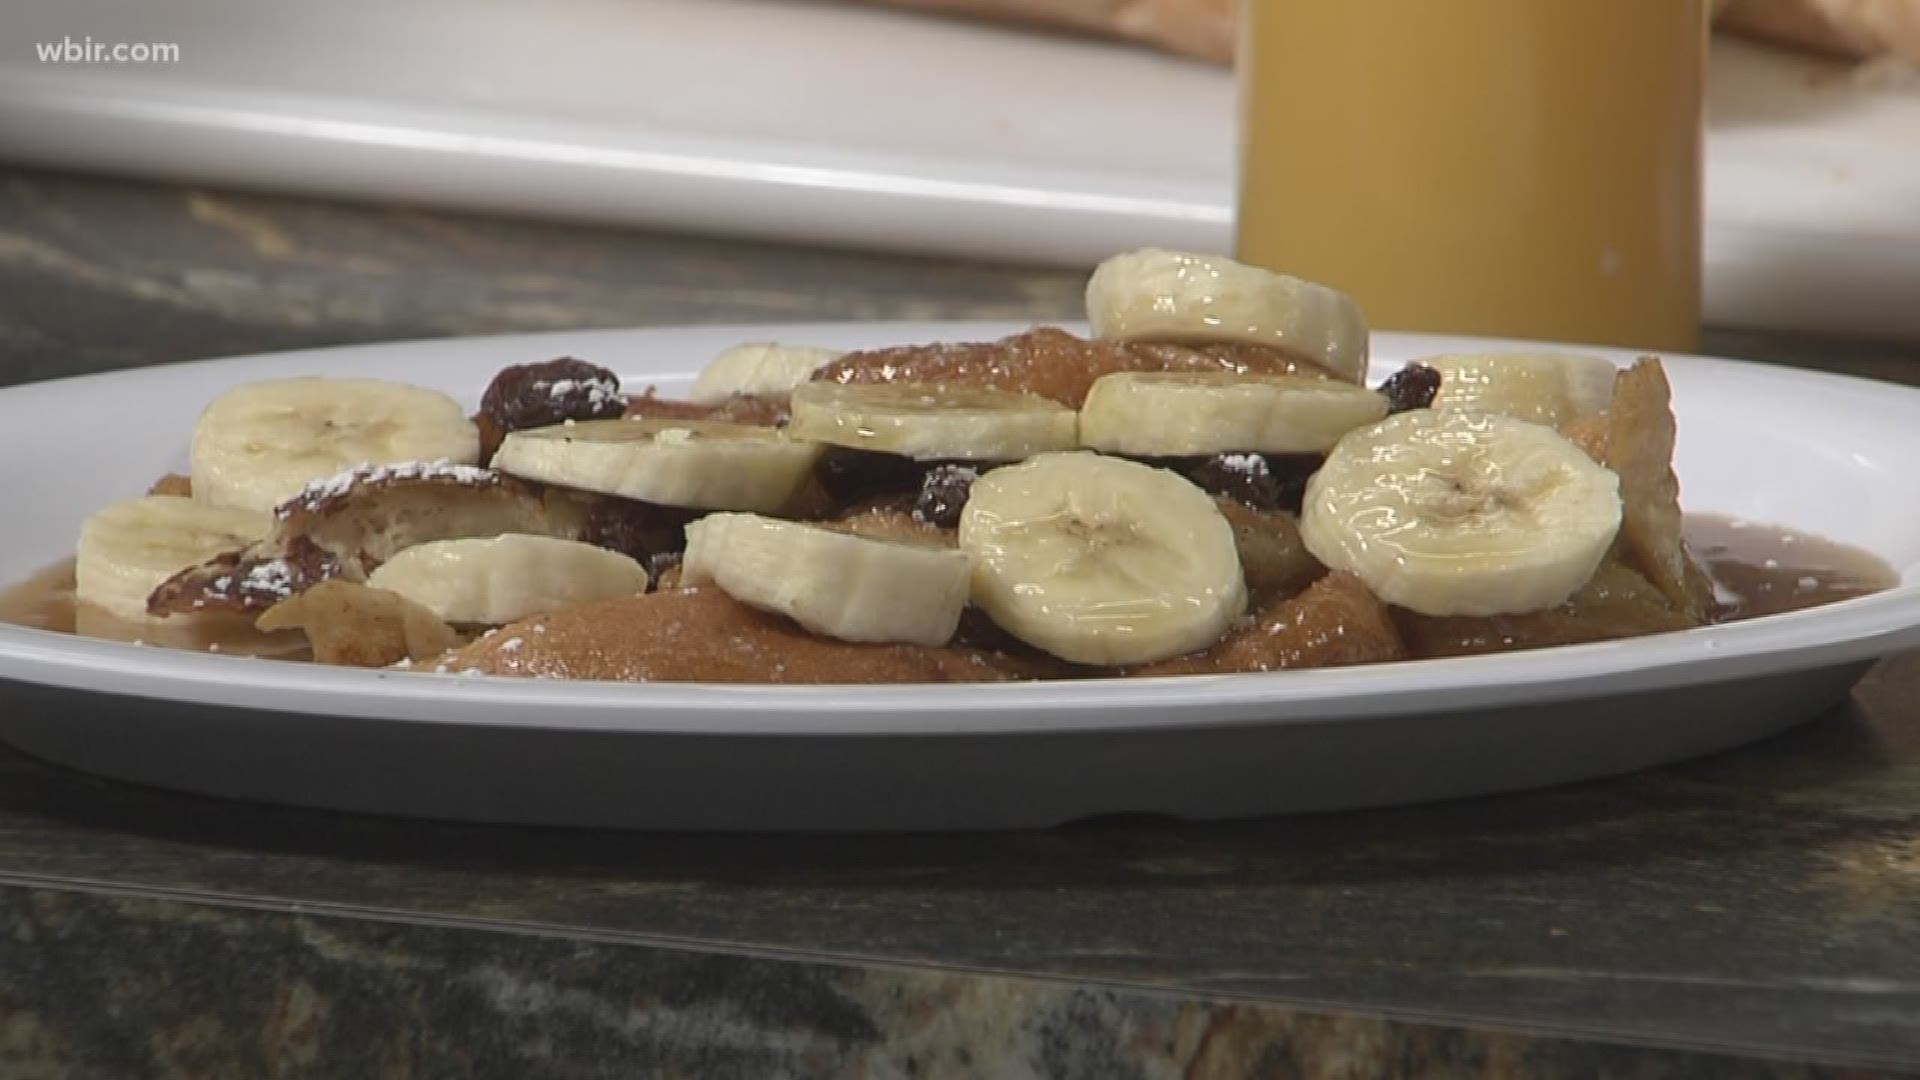 Ruby Sunshine shows us how to make banana foster.